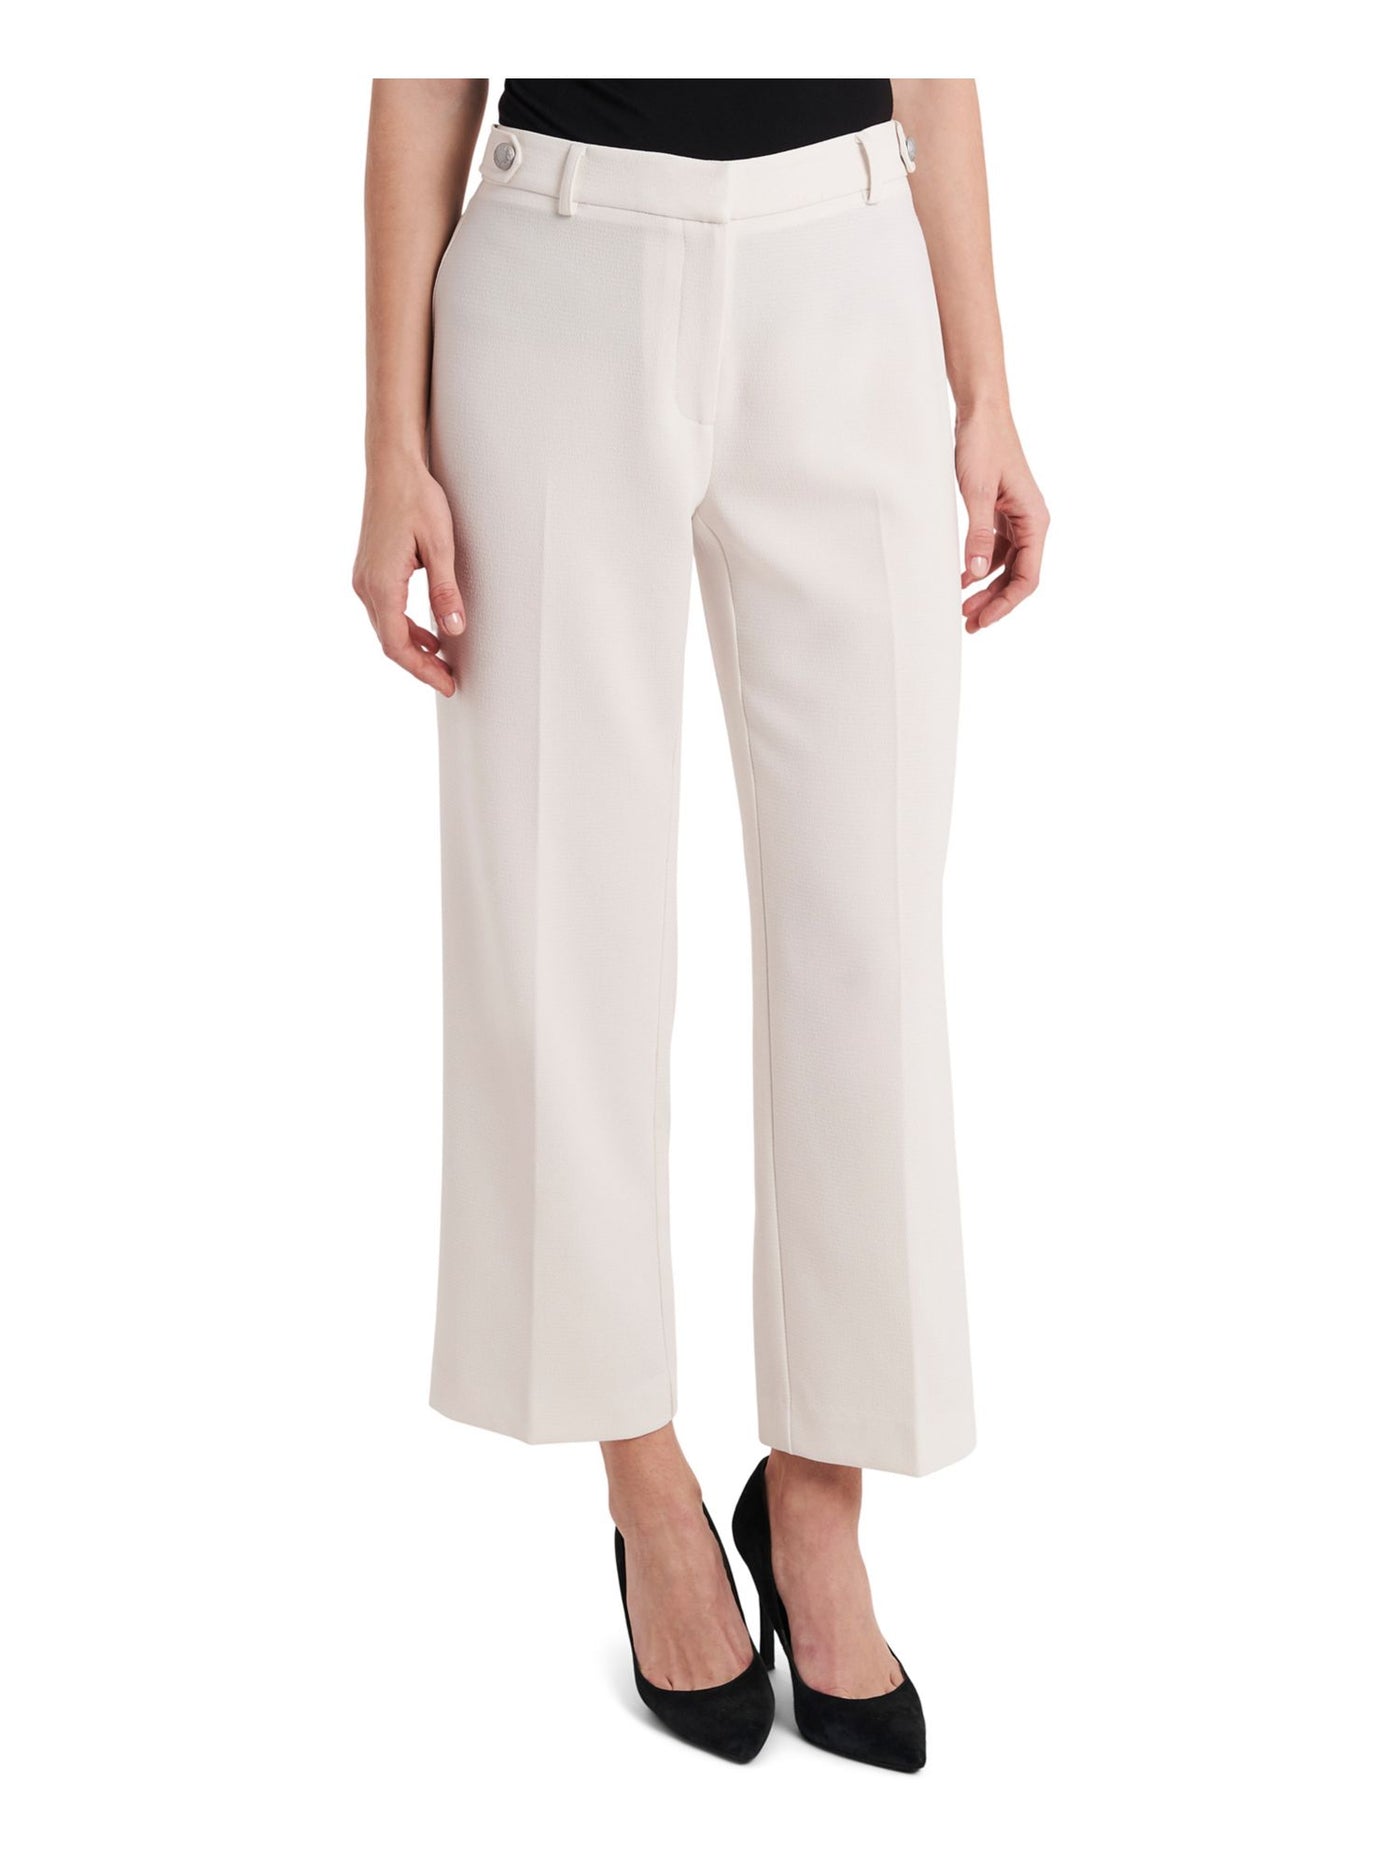 RILEY&RAE Womens White Pocketed Zippered Cropped Crepe Wear To Work Wide Leg Pants 10